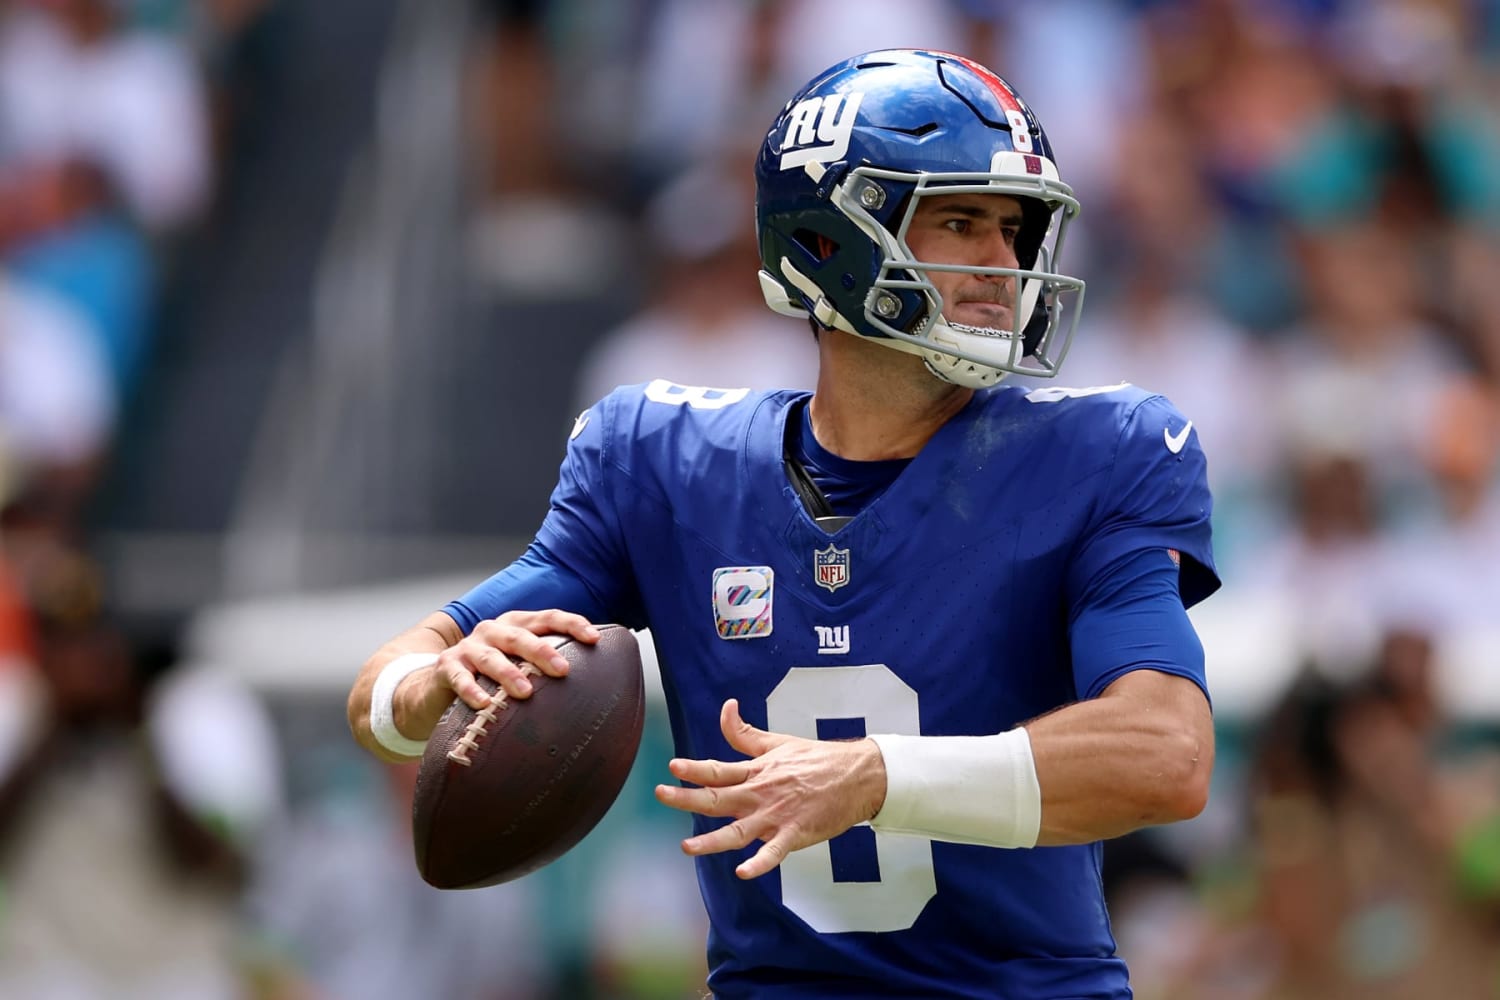 Giants vs. Cowboys 2022, Week 3: Everything you need to know - Big Blue View